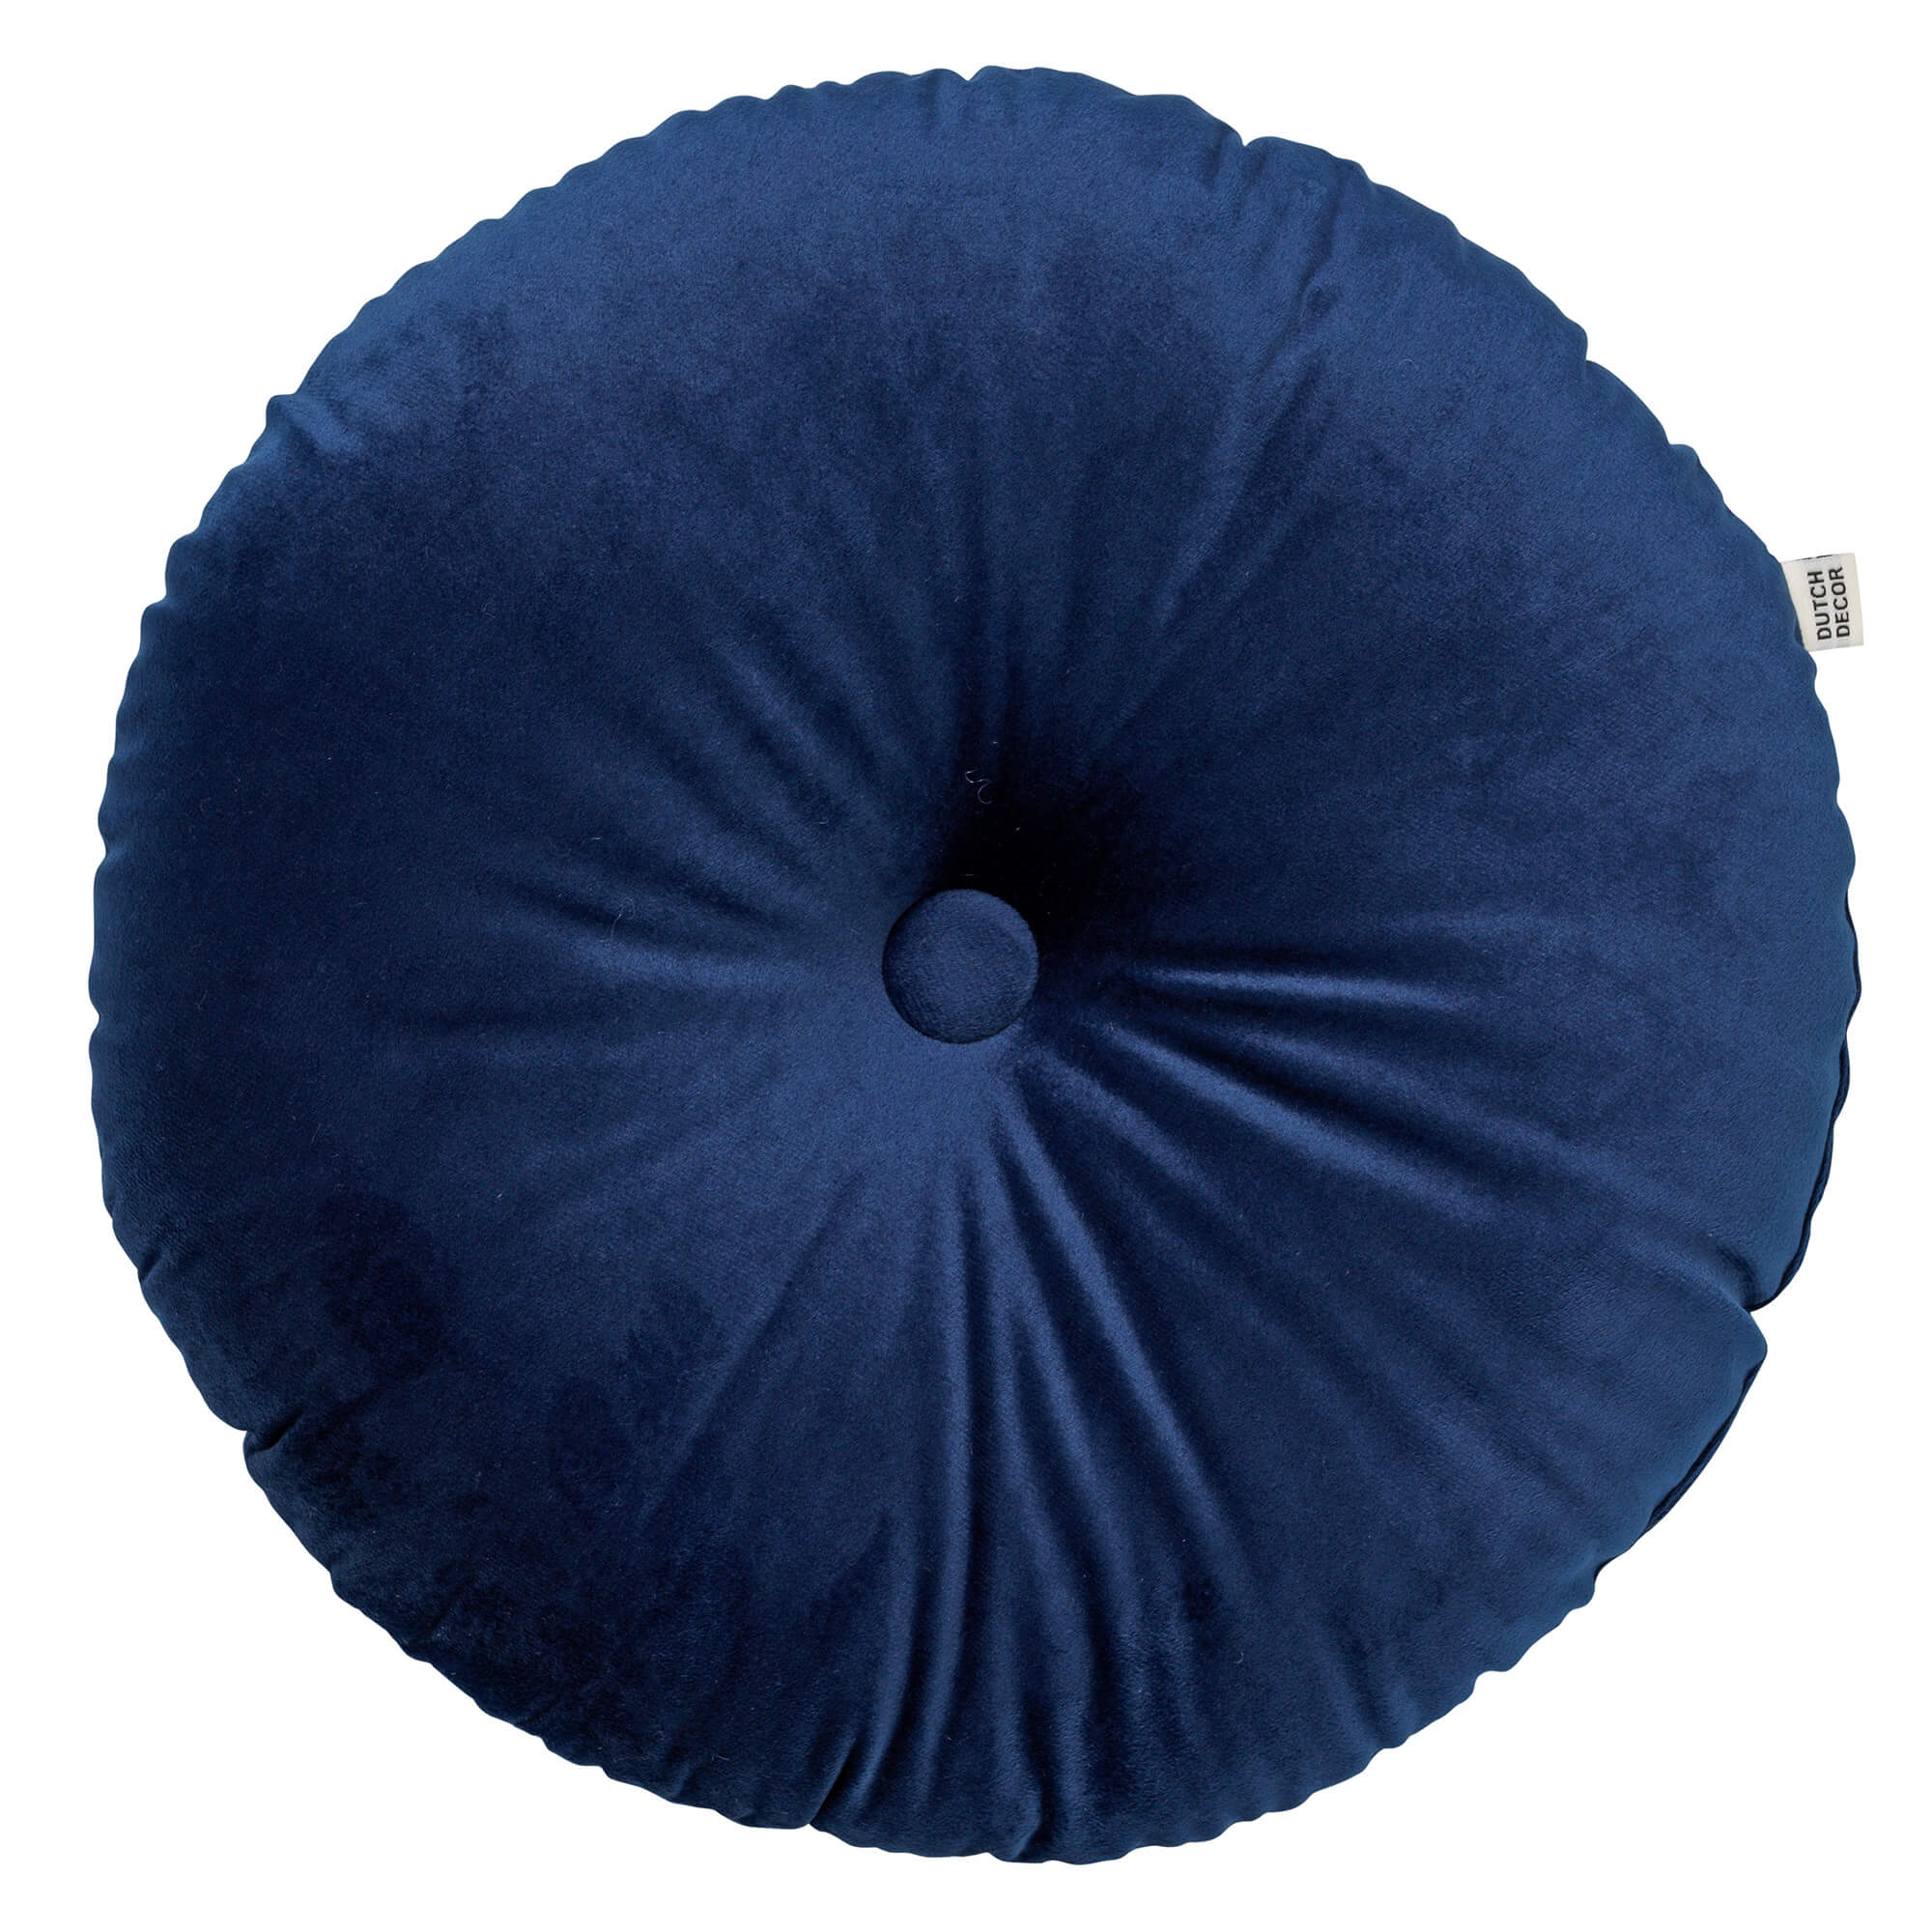 OLLY - Coussin rond en velours Insignia Blue 40 cm 